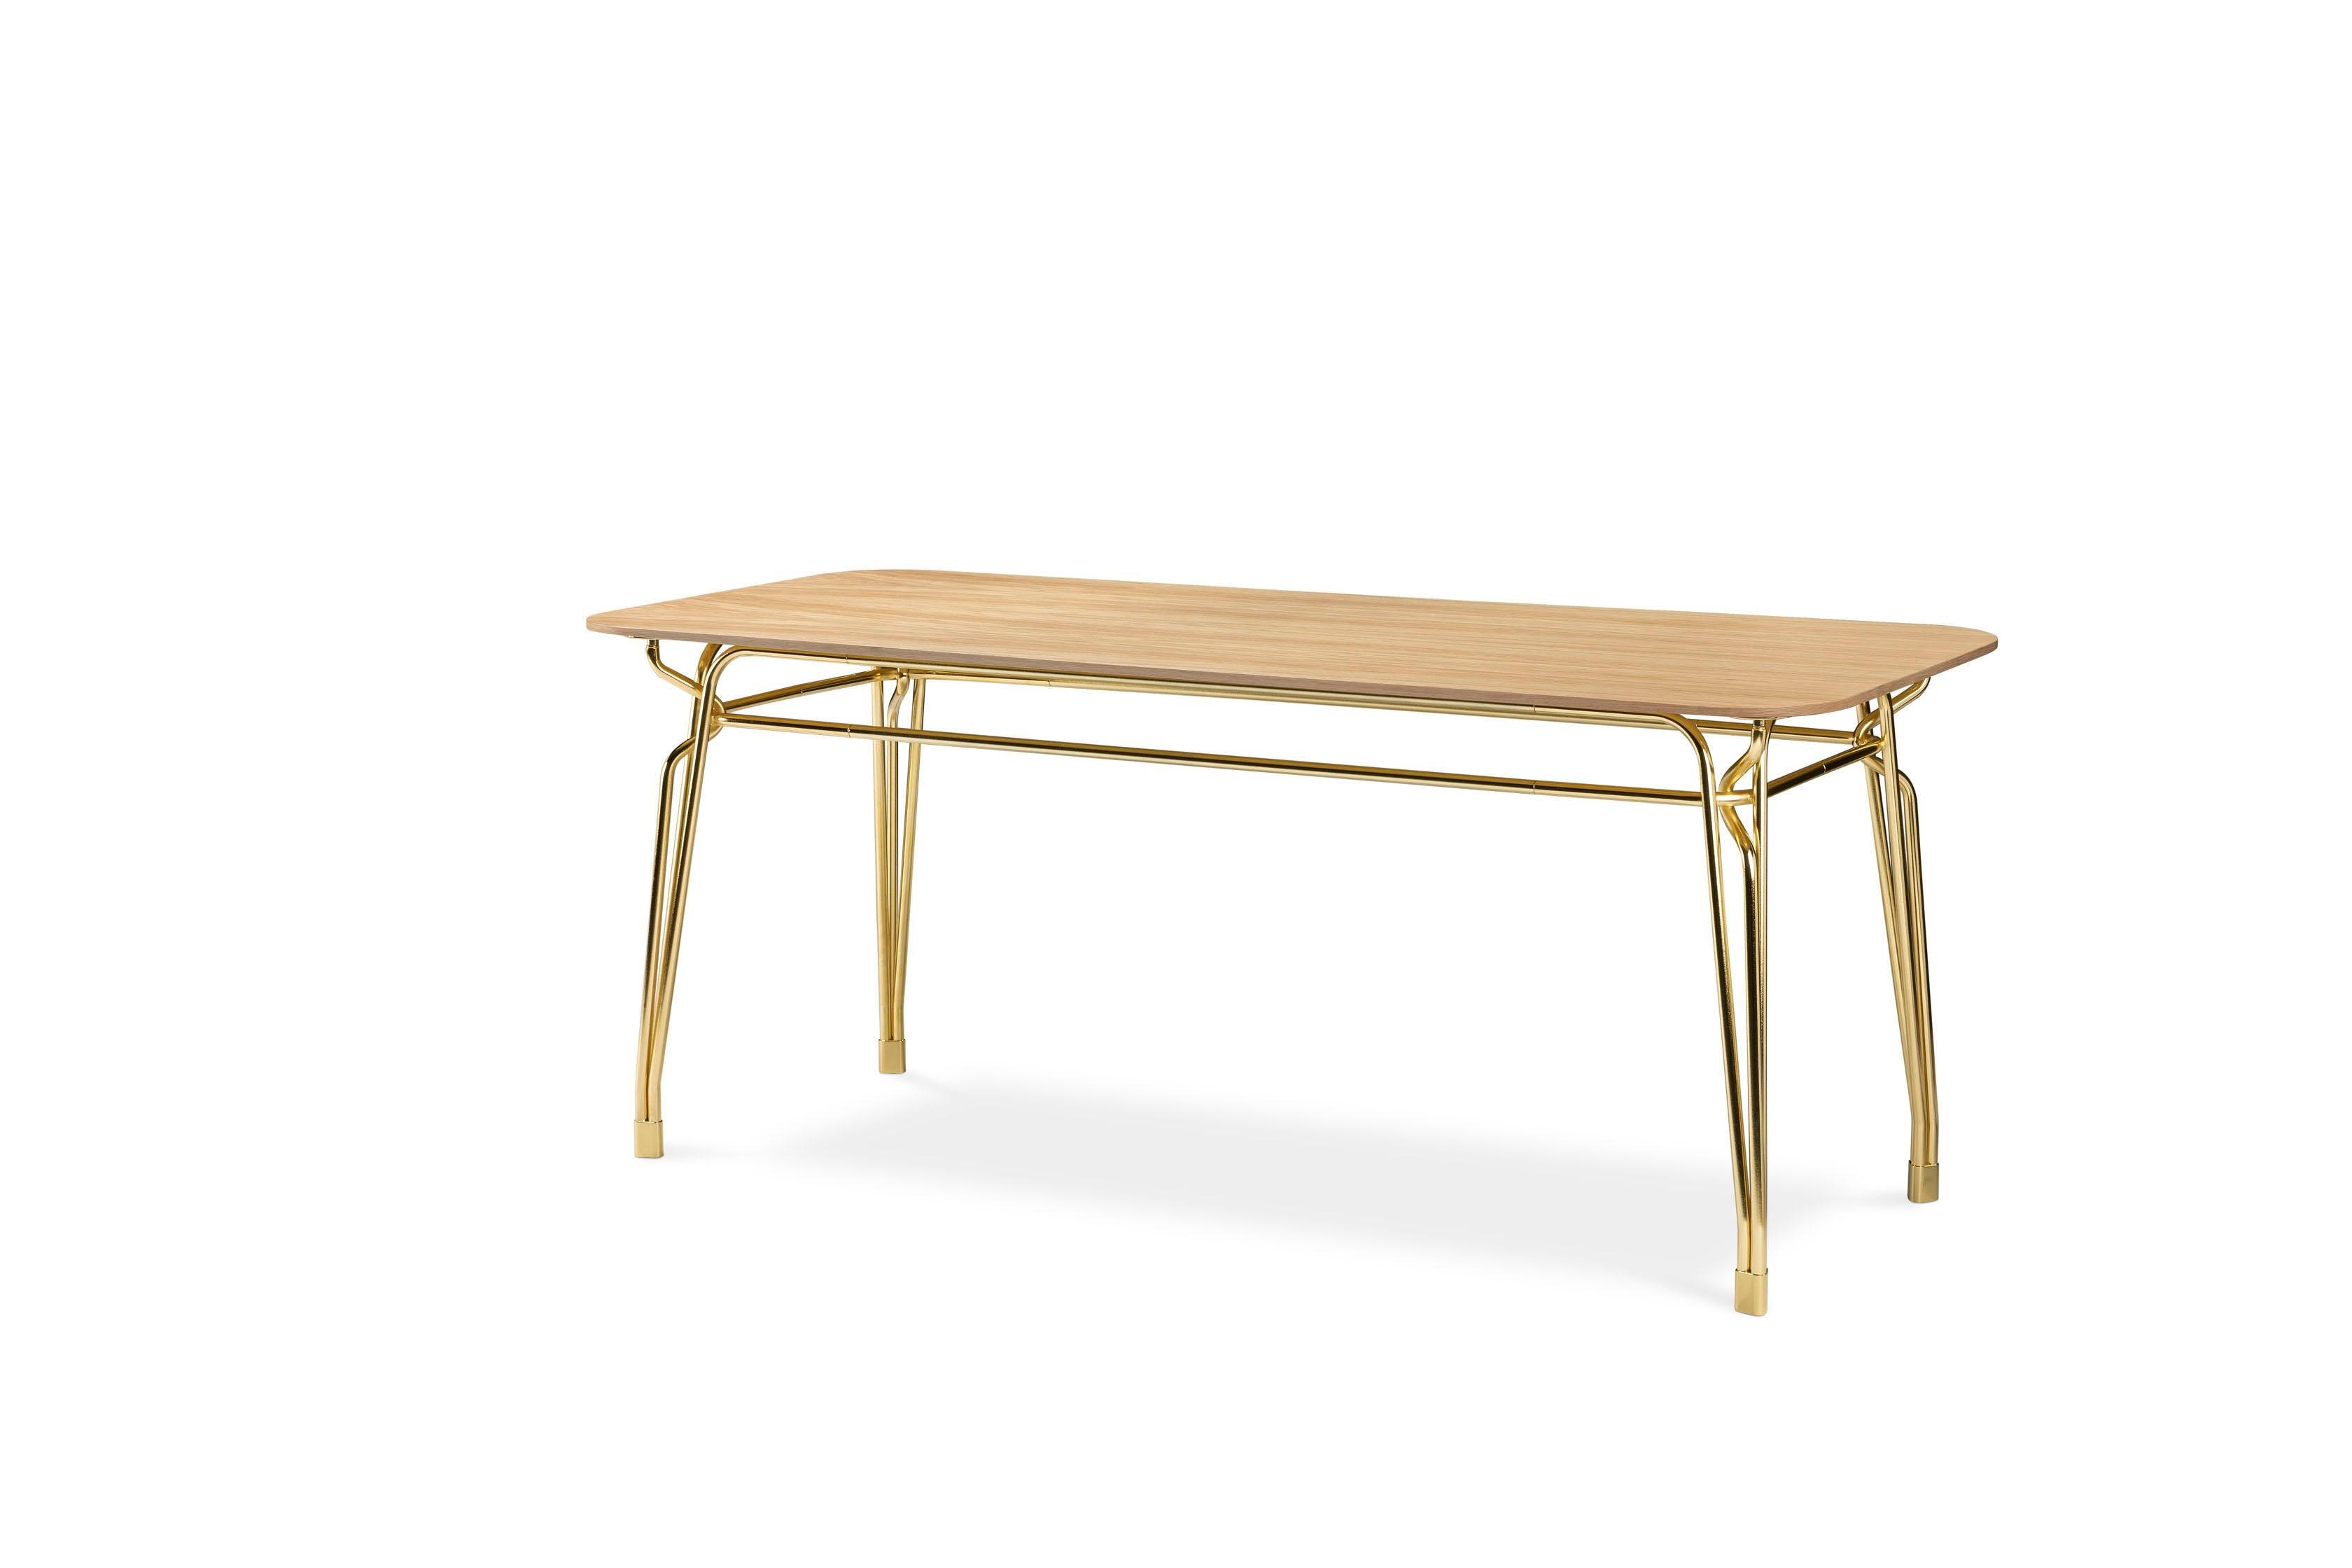 Botany Dining Table in Striped Oak Top with Polished Brass Legs In Excellent Condition For Sale In Brooklyn, NY